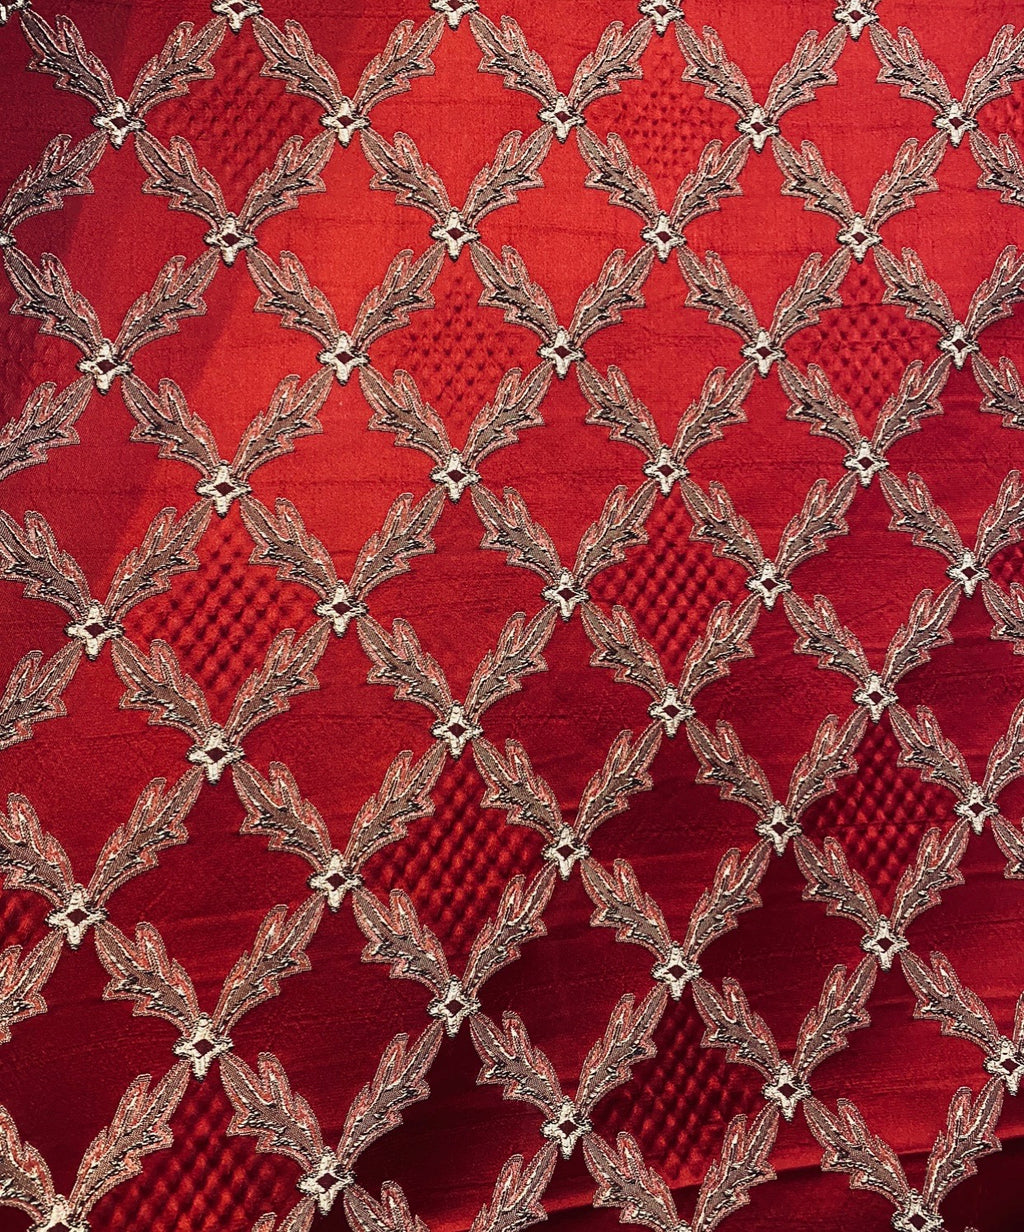 Lacquer Red Leather - Upholstery Designer Fabric